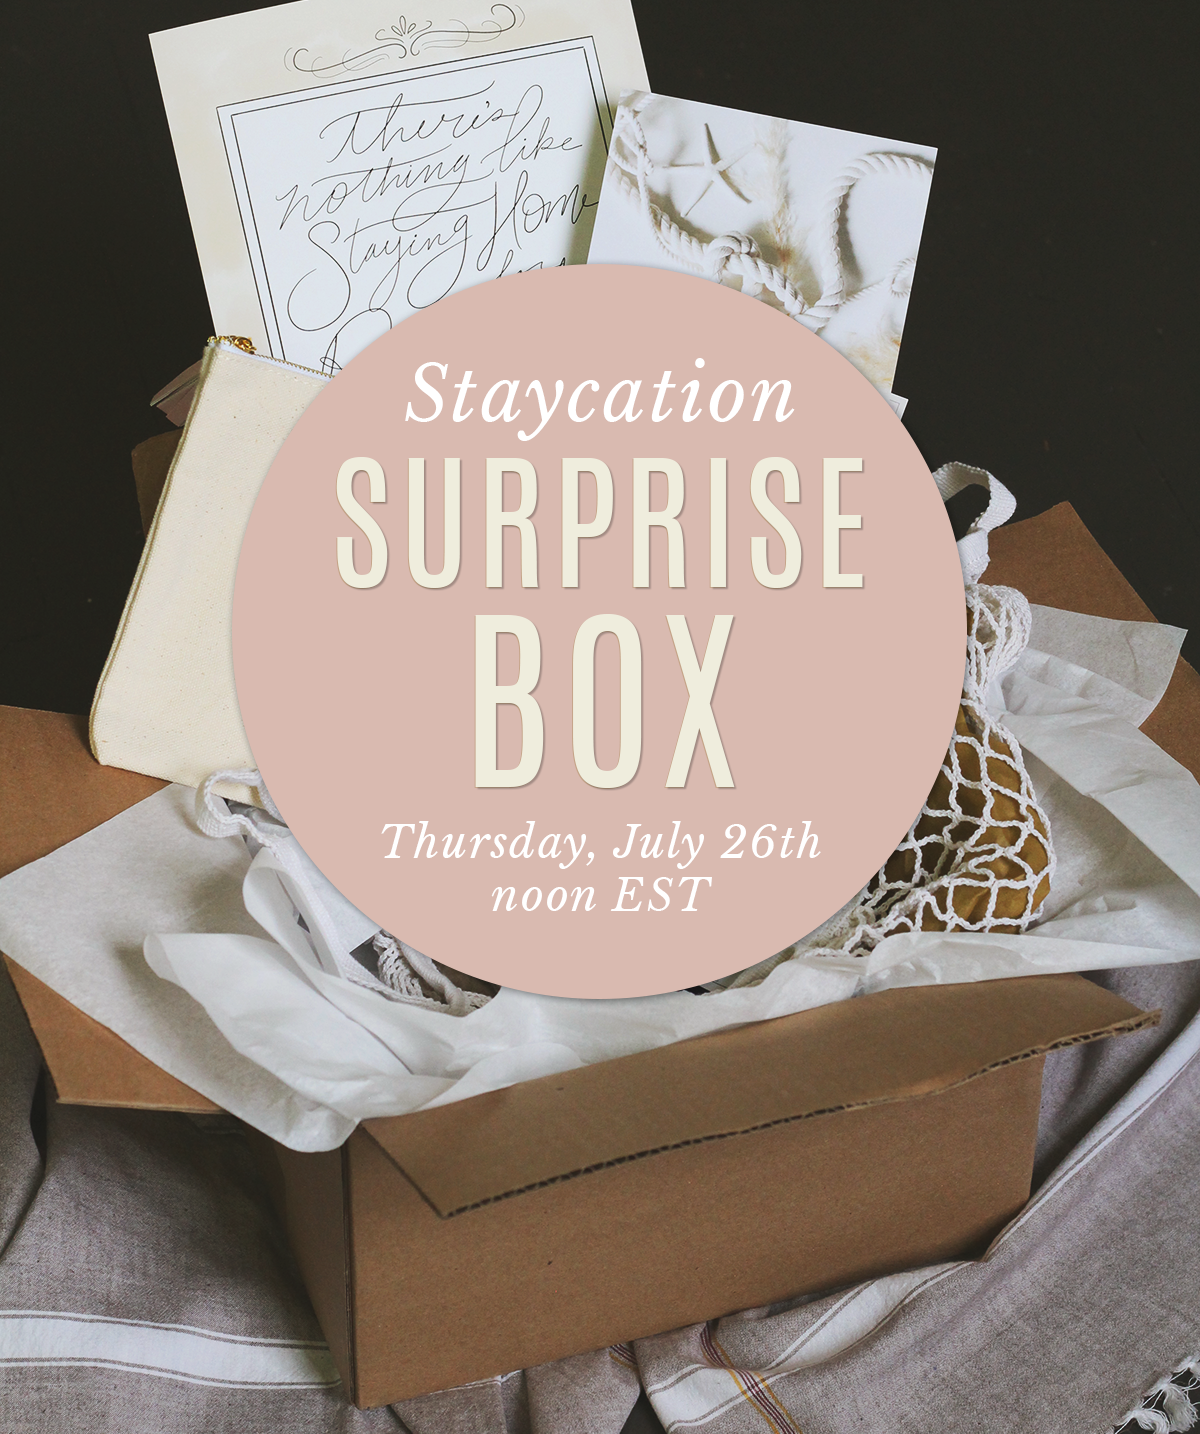 Lily & Val Staycation Surprise Box Launching on Thursday, July 26th